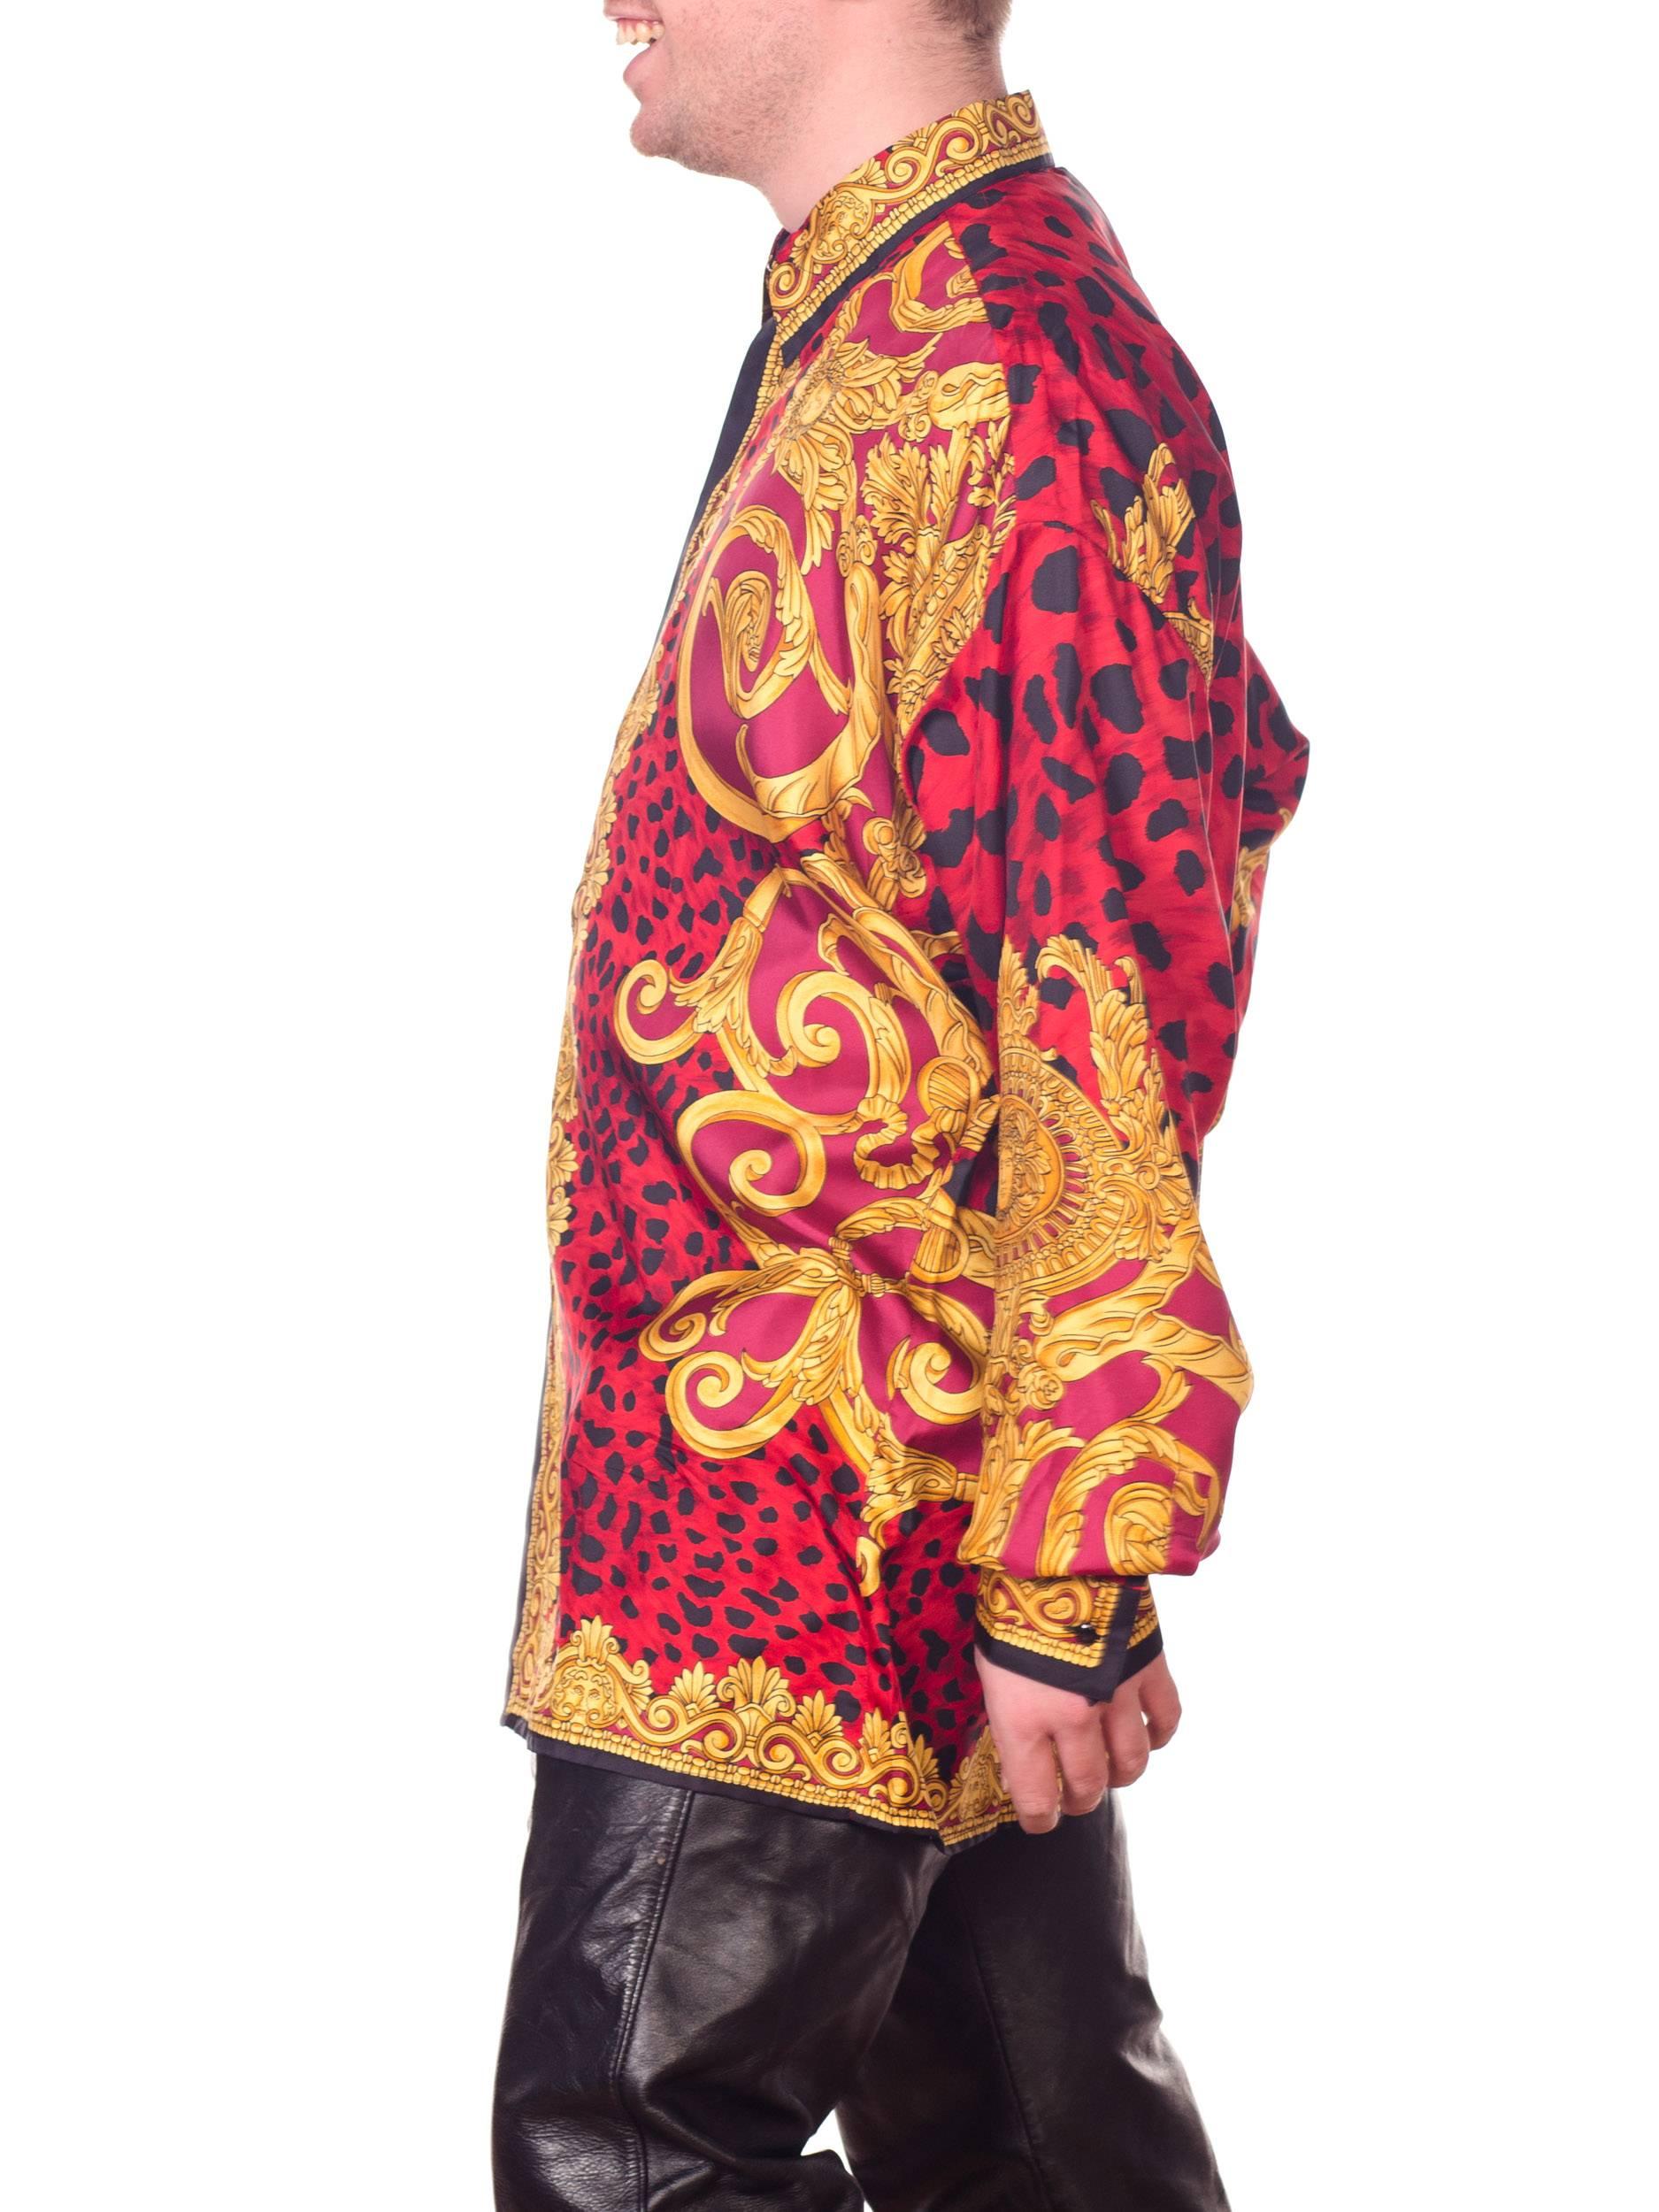 Gianni Versace early 1990s Mens Red Baroque Leopard Print Silk Shirt 2